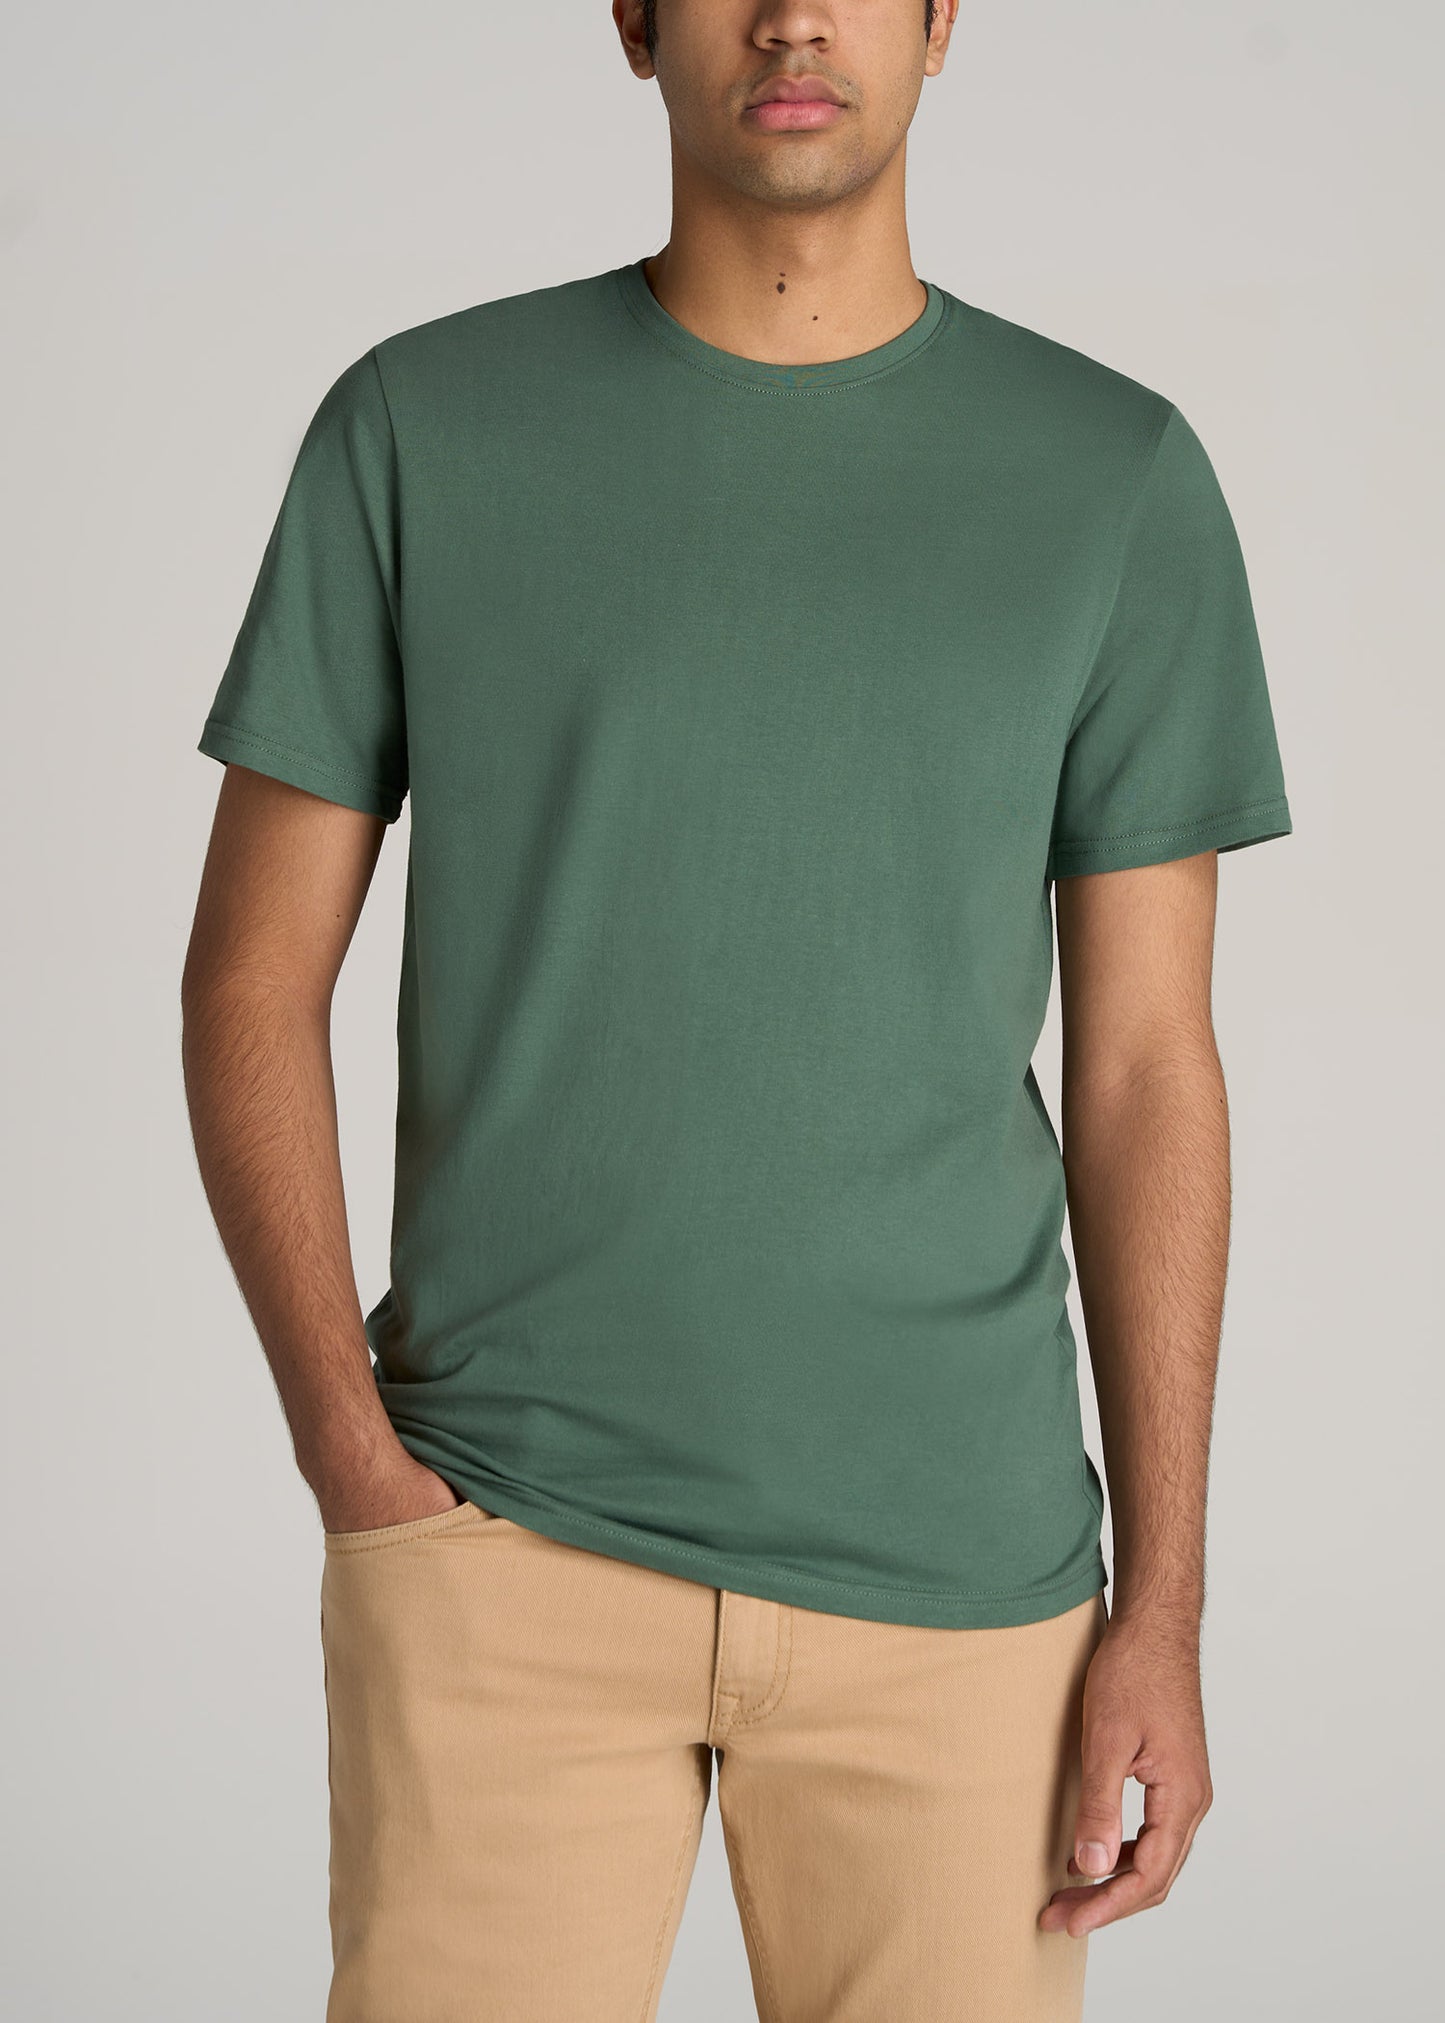 American-Tall-Men-Everyday-REGULAR-FIT-Crew-Neck-T-Shirt-Forest-Green-front